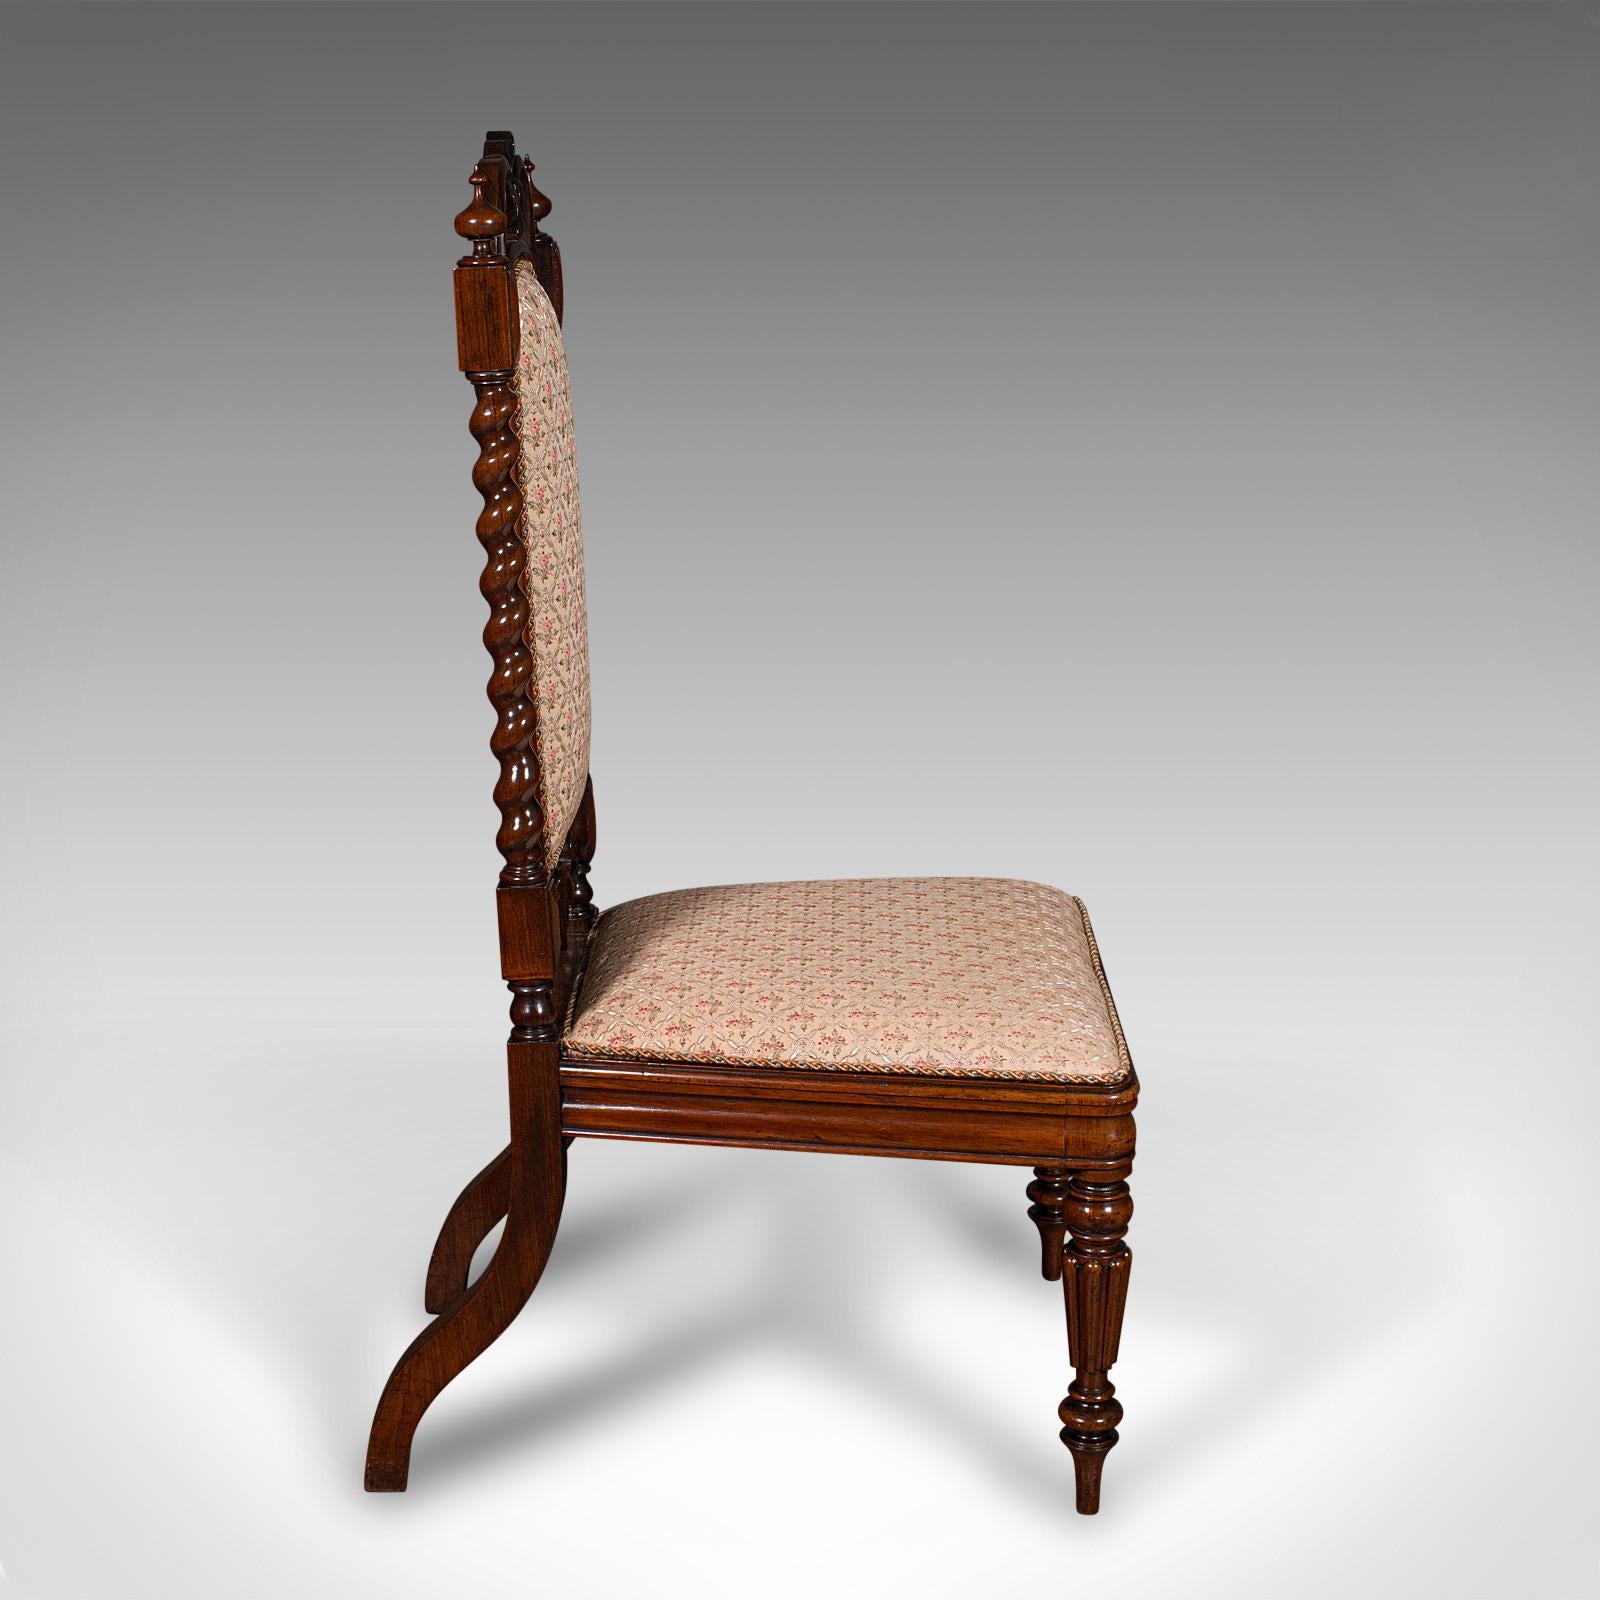 British Antique Morning Room Chair, English, Silk Cotton, Side Seat, William IV, C.1835 For Sale